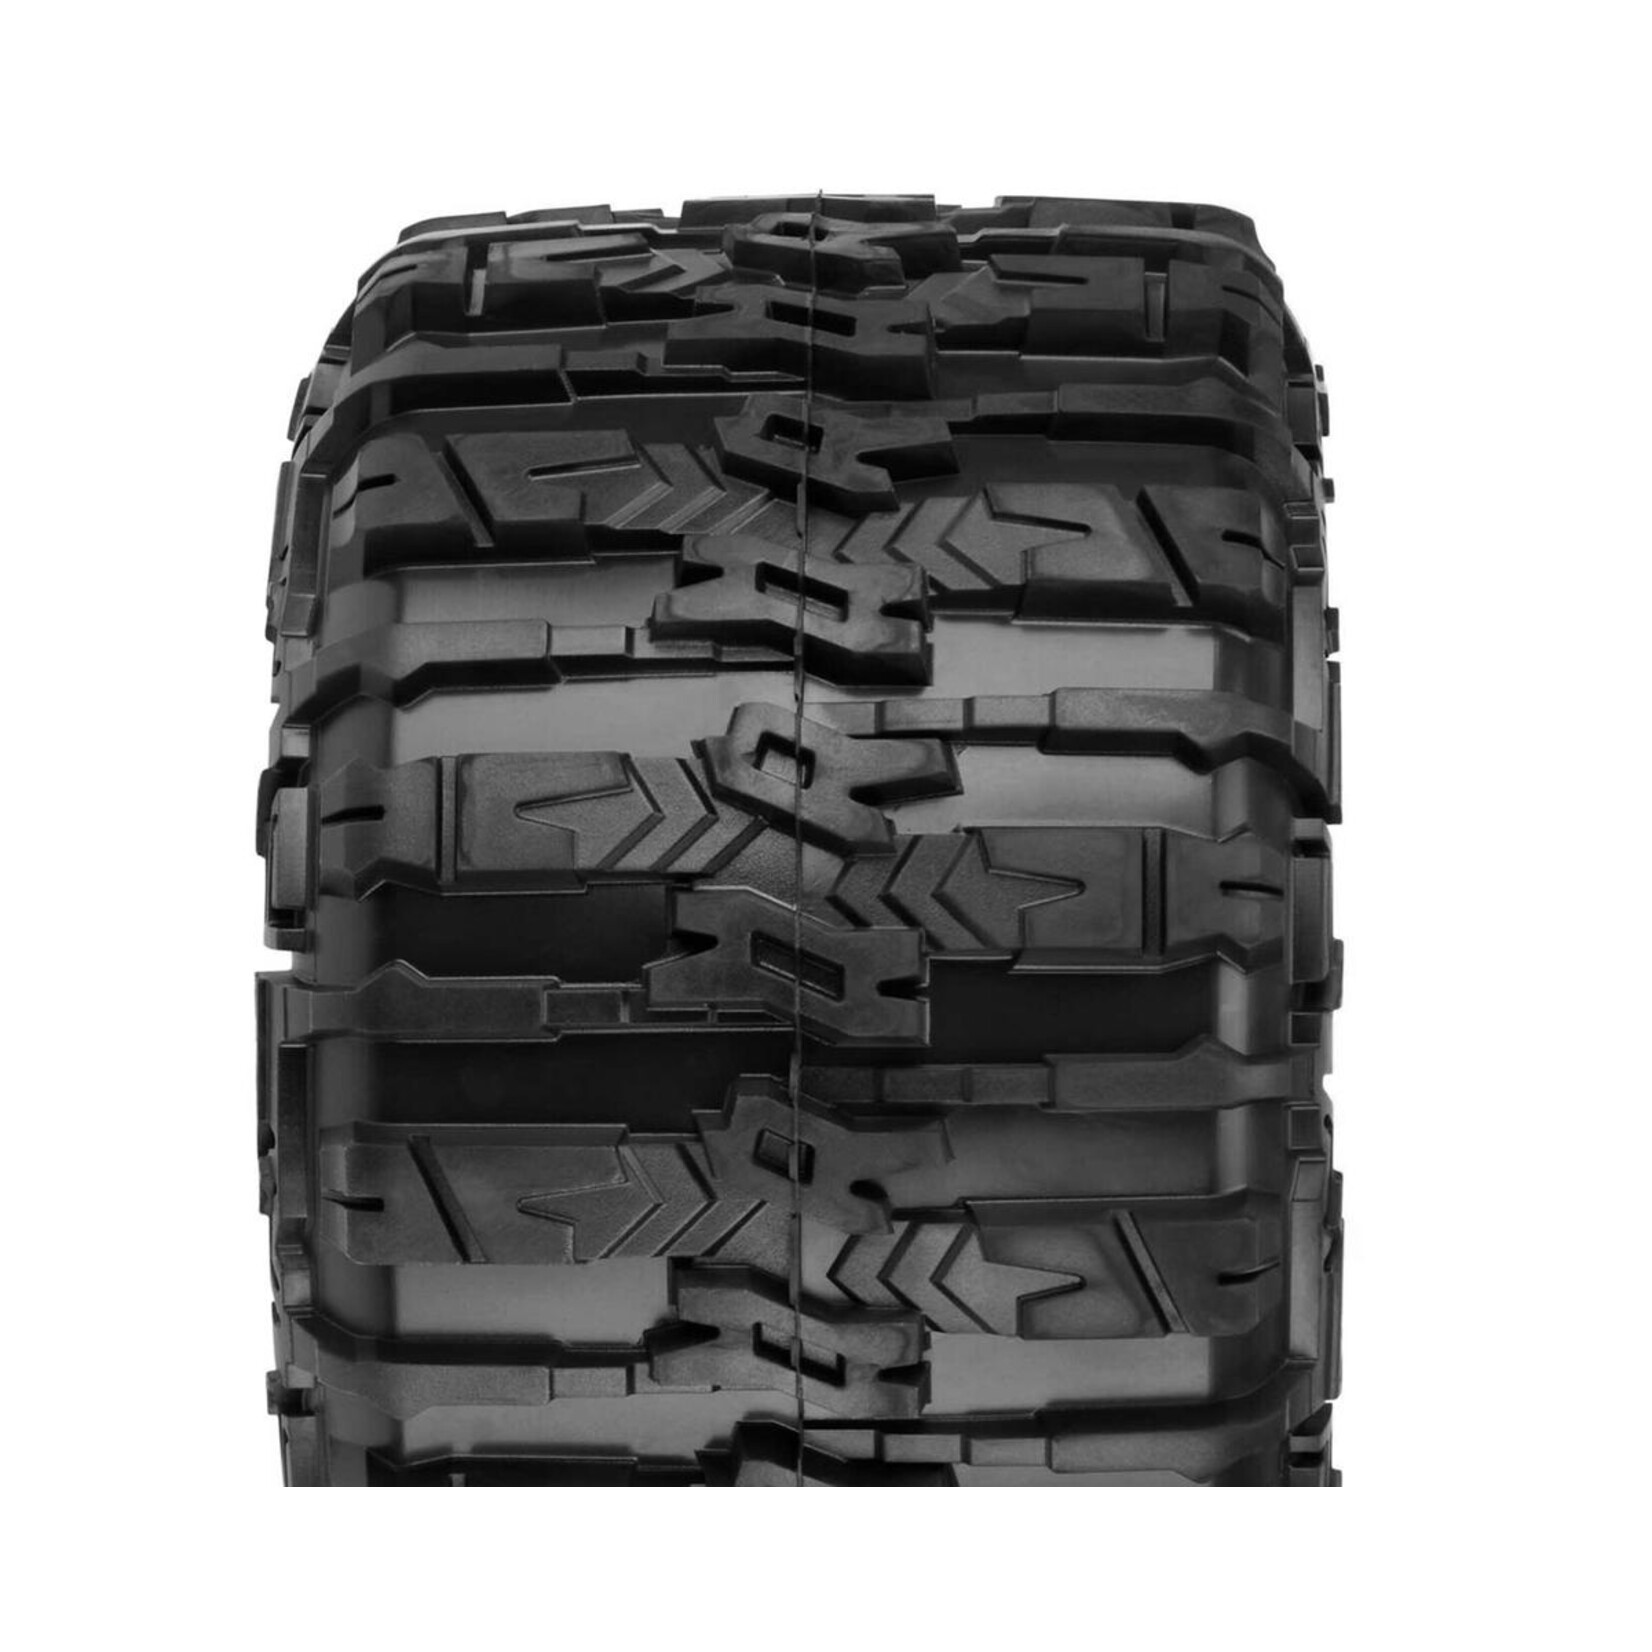 Pro-Line Pro-Line Trencher HP Belted 3.8" Pre-Mounted Truck Tires (2) (Black) (M2) w/Raid Wheels #10155-10